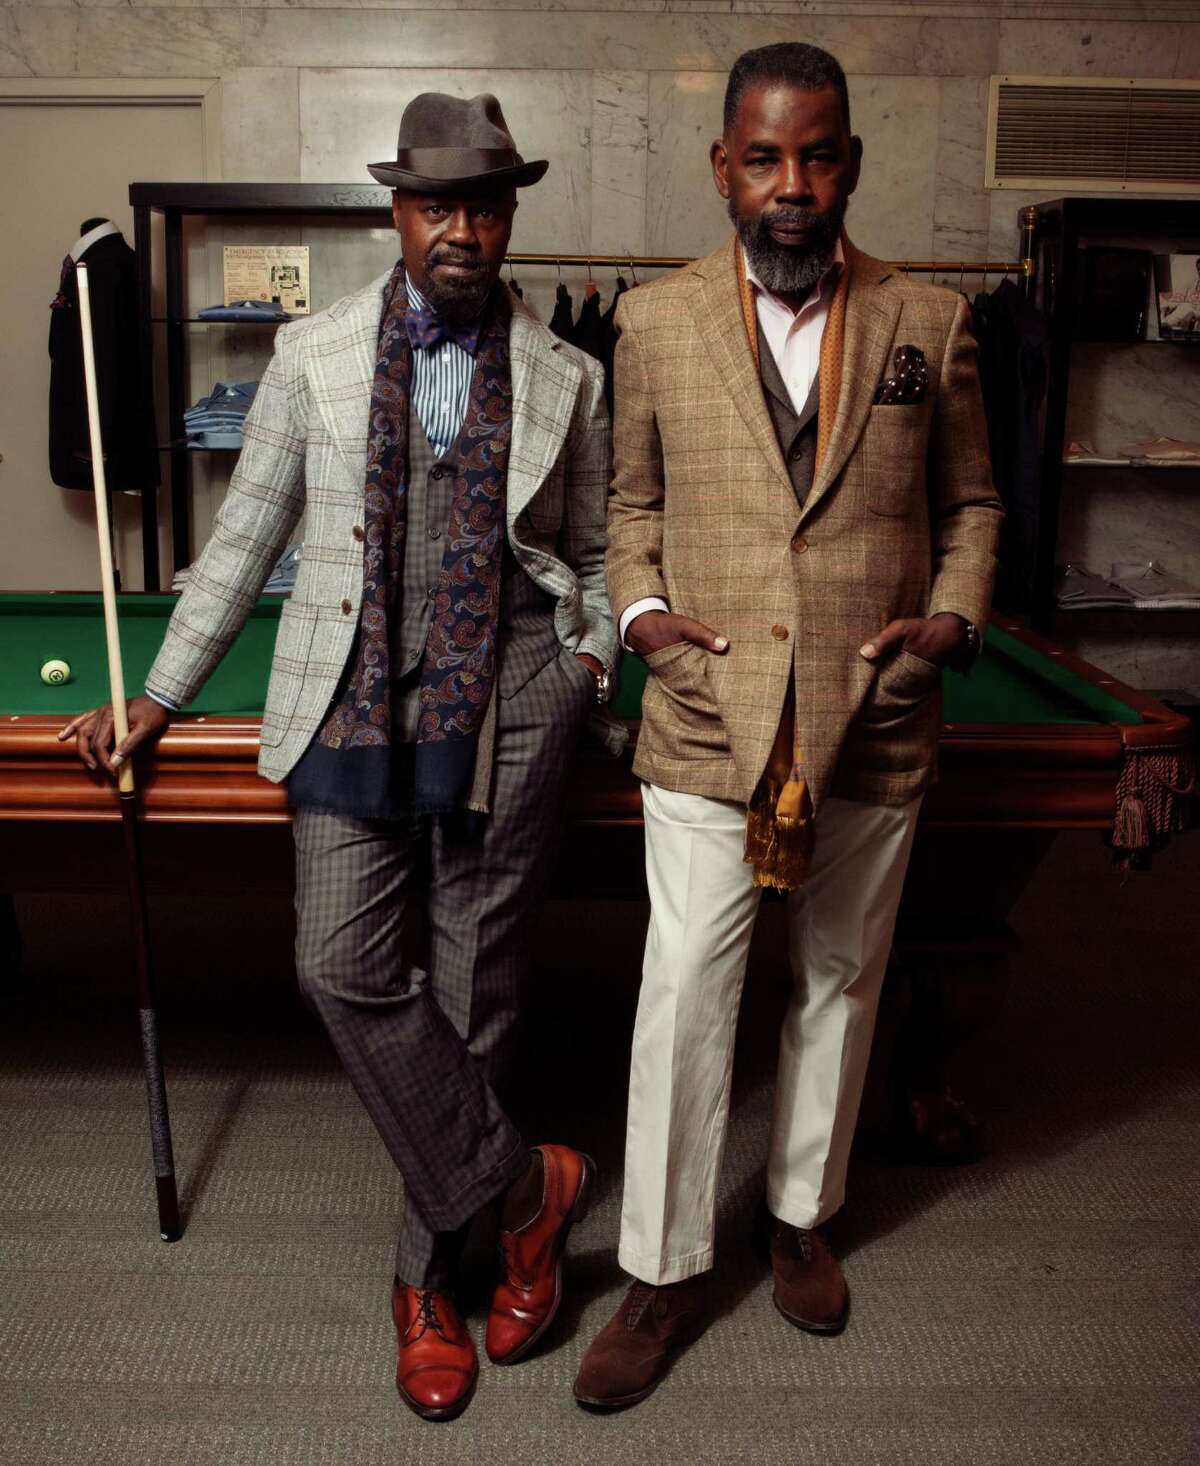 Members of the Neo Dandy Arts Collective meet regularly to share their appreciation of fine menswear. Pictured are members Alvin Lampkins (left) and Kaya Fortune.